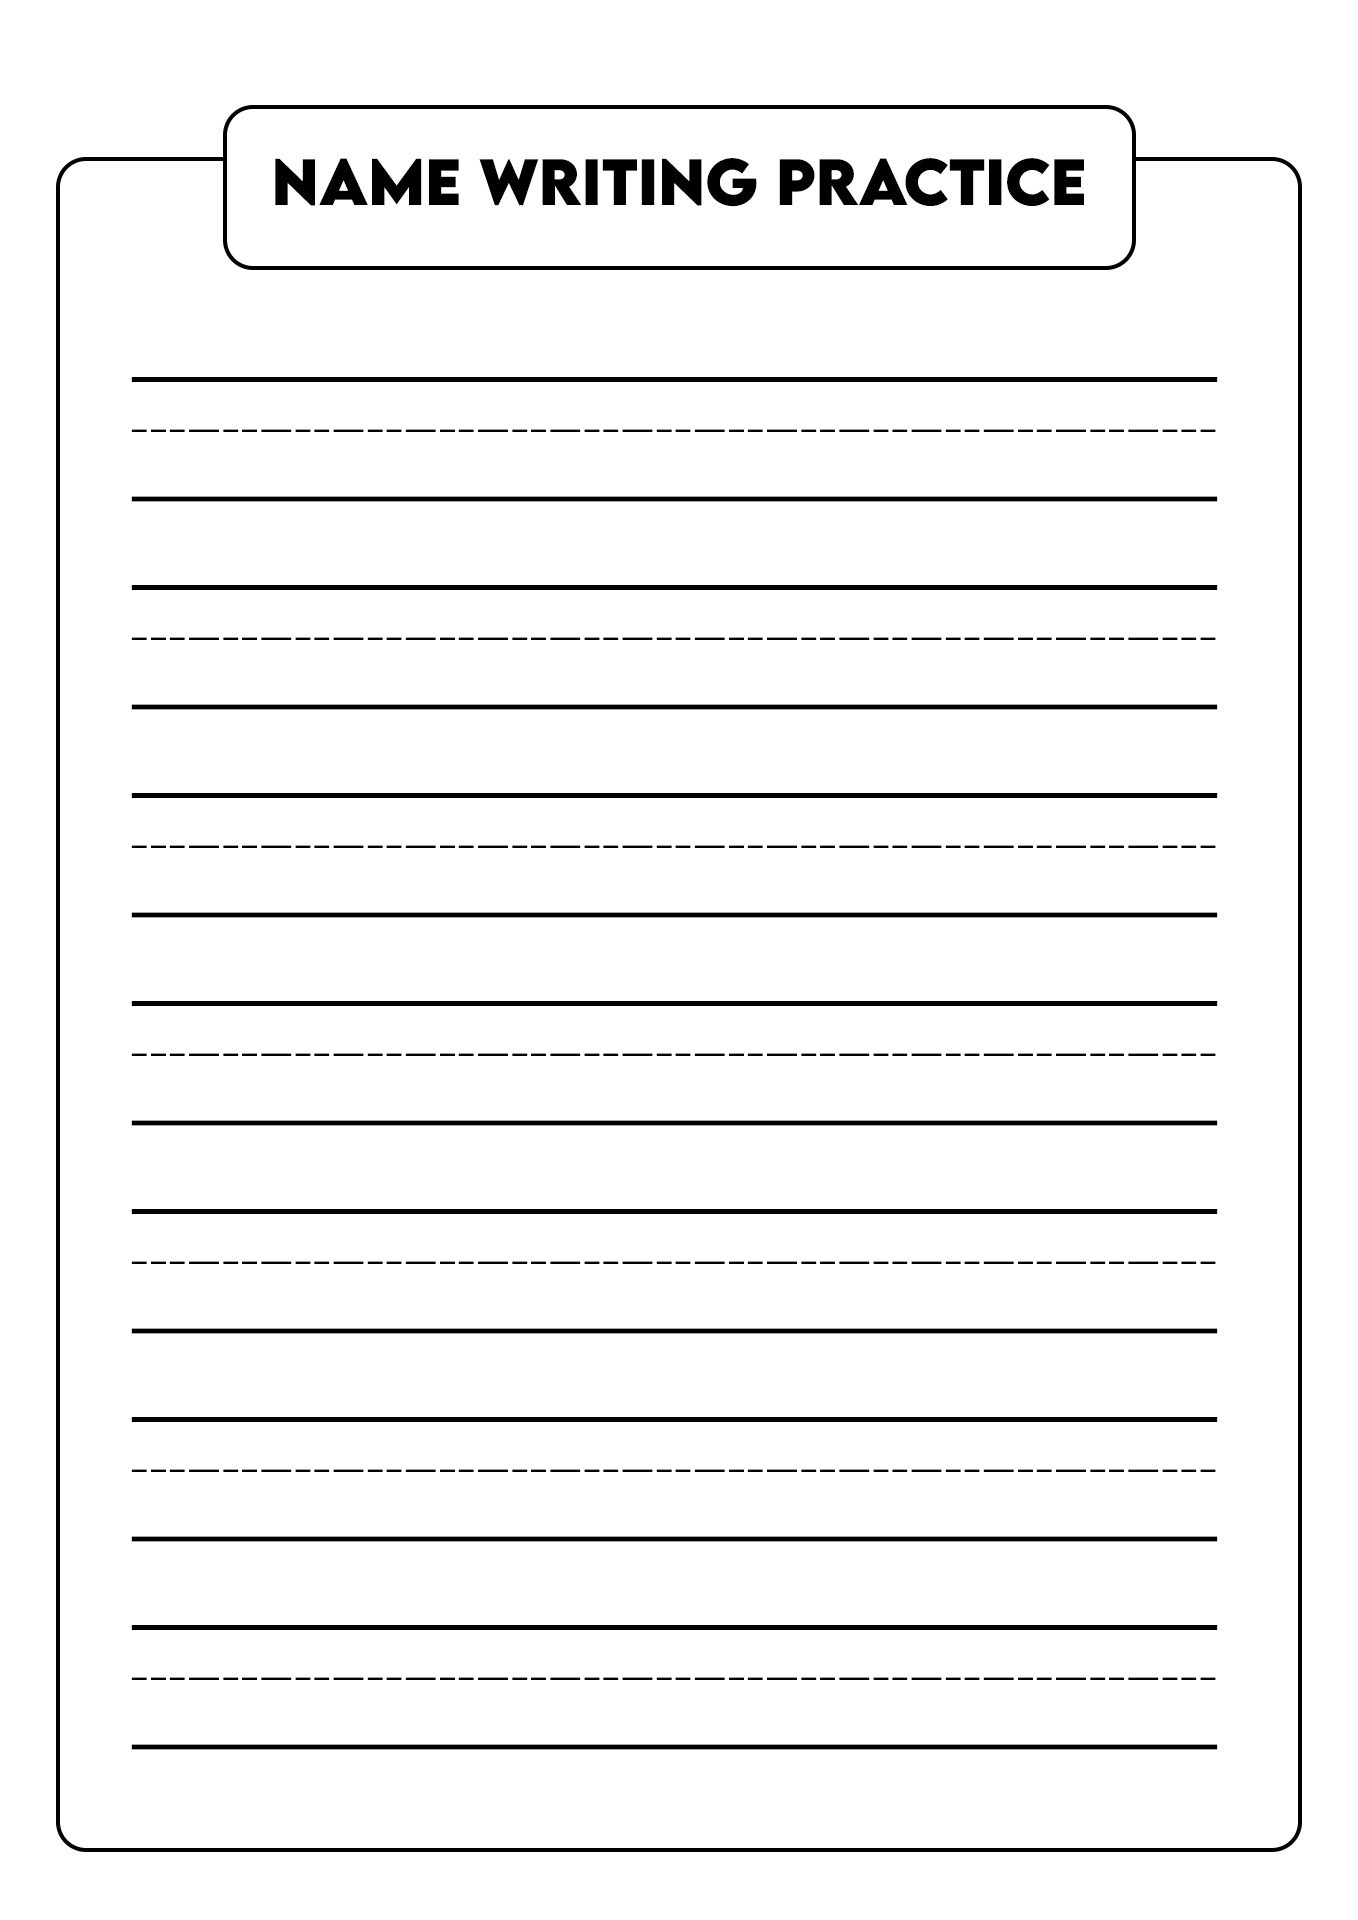 11-best-images-of-worksheets-practice-writing-their-names-tracing